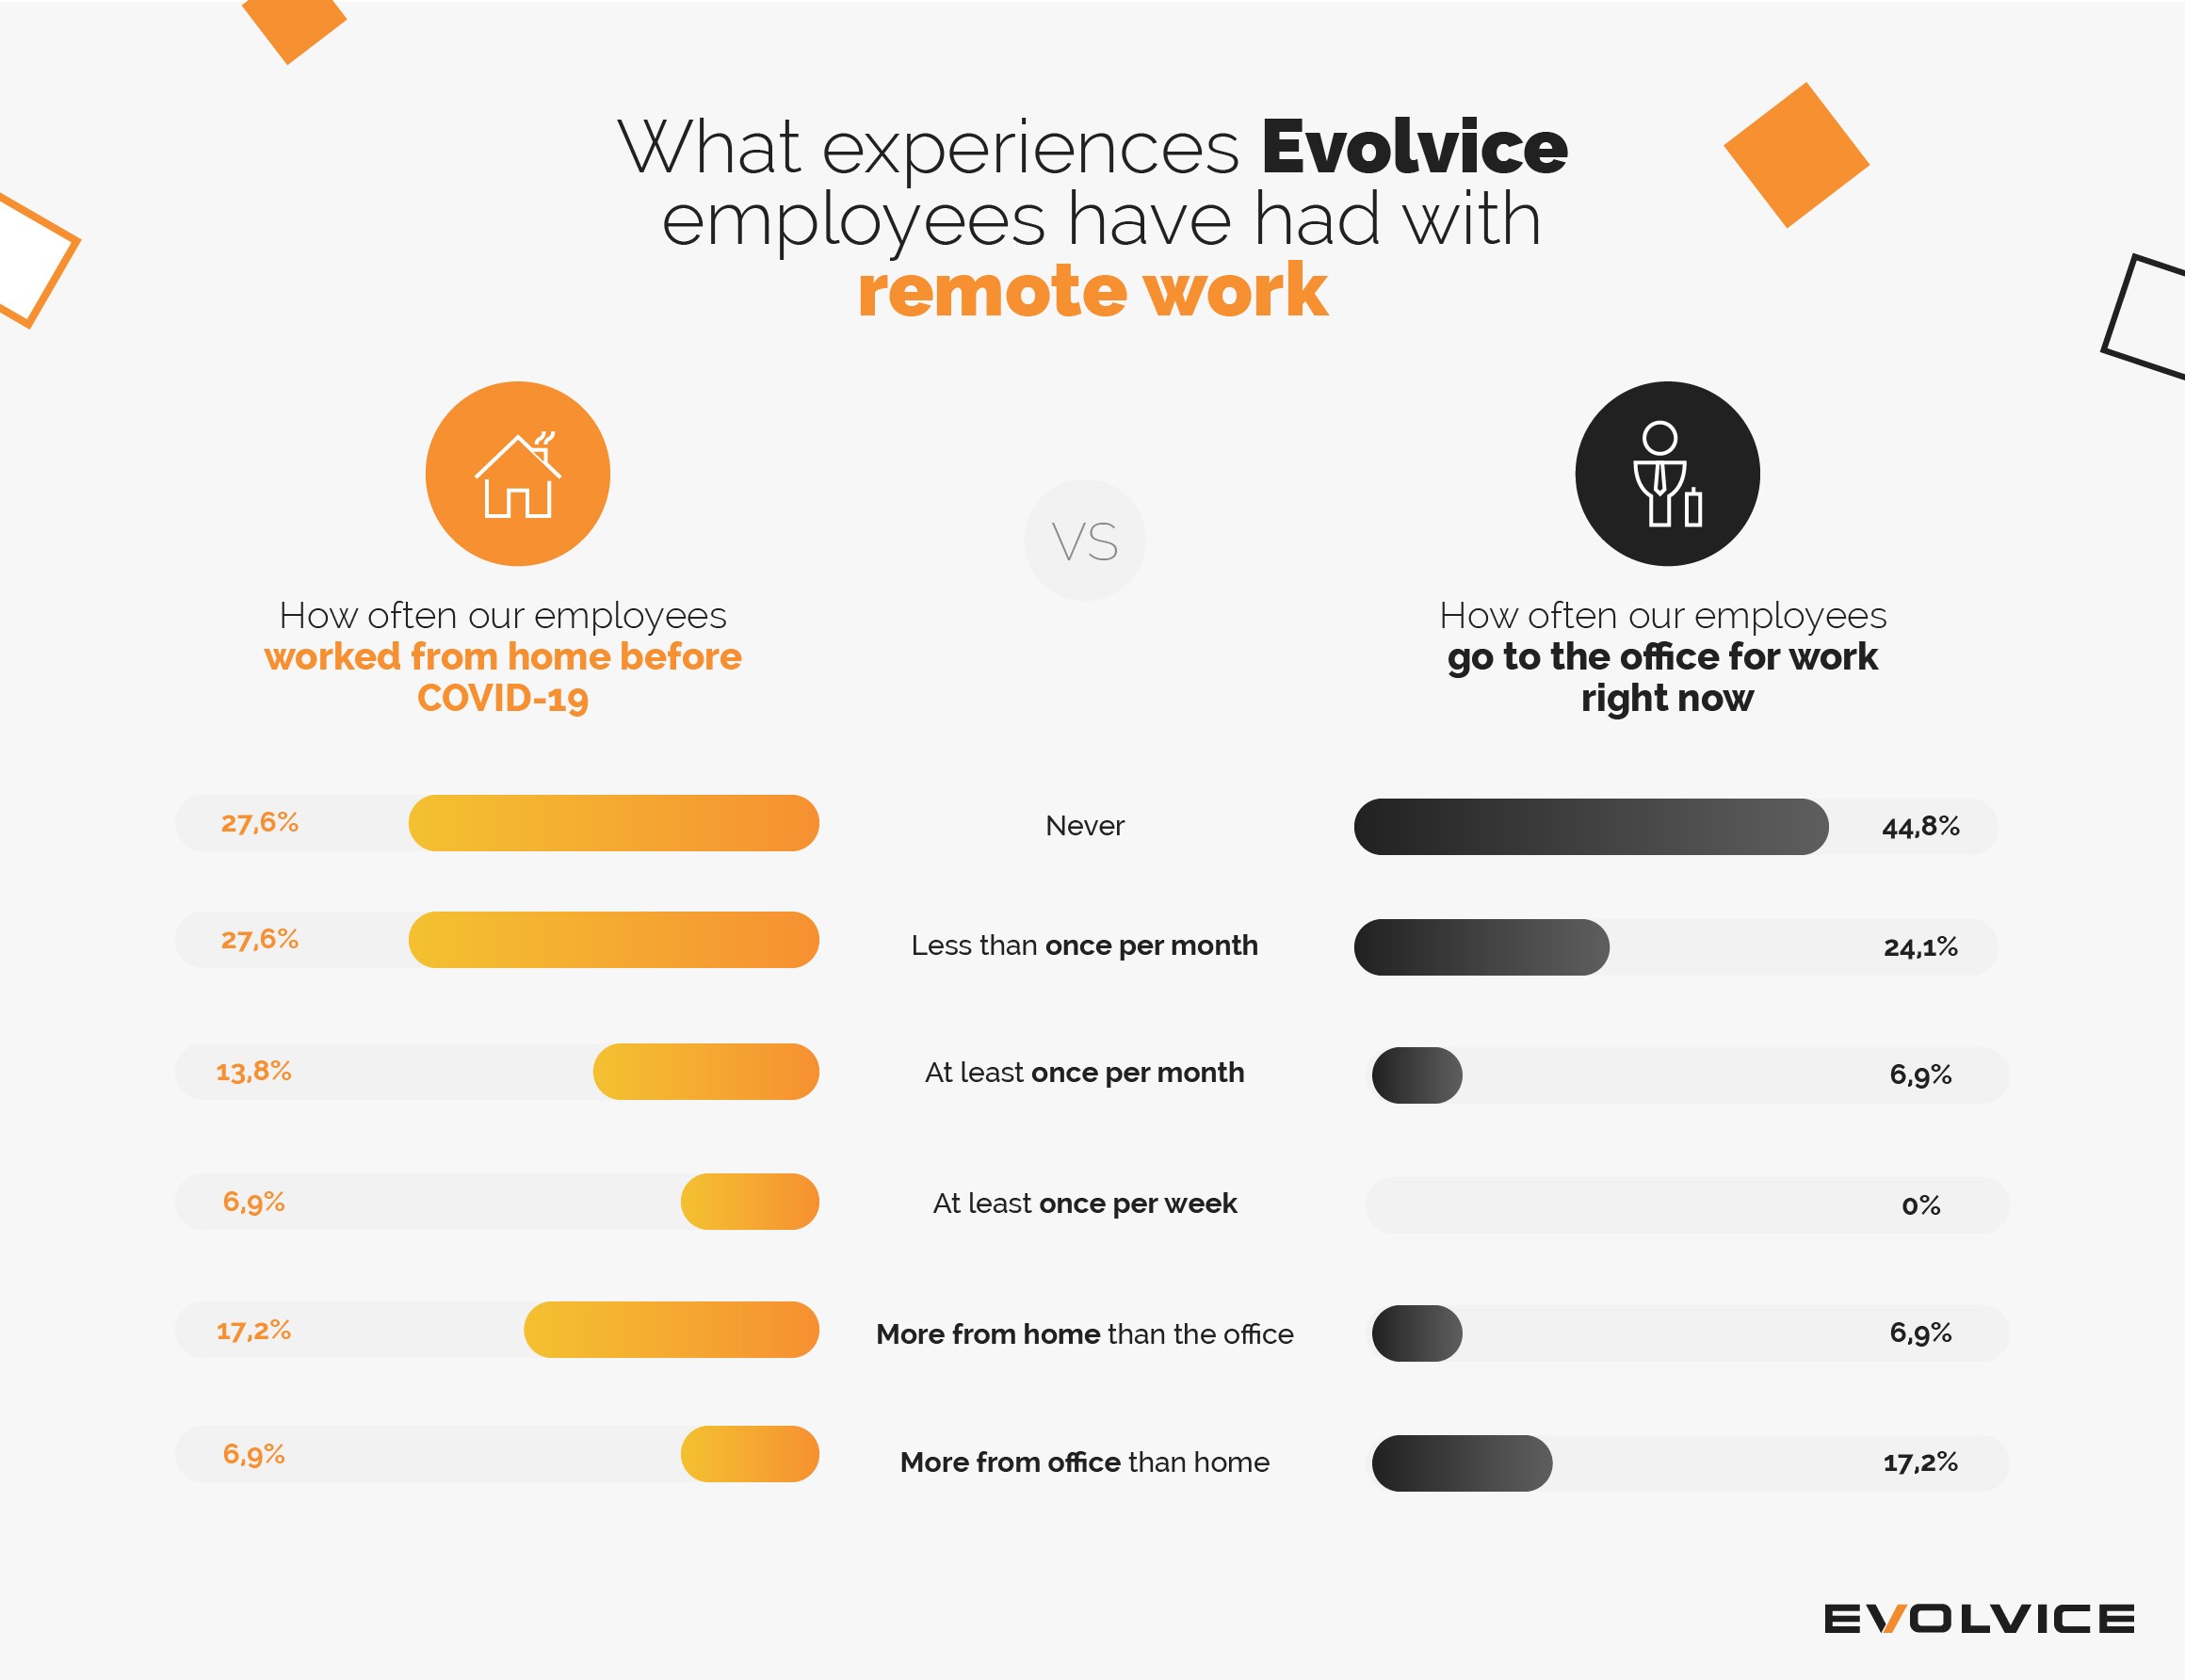 What experiences Evolvice employees had with remote work